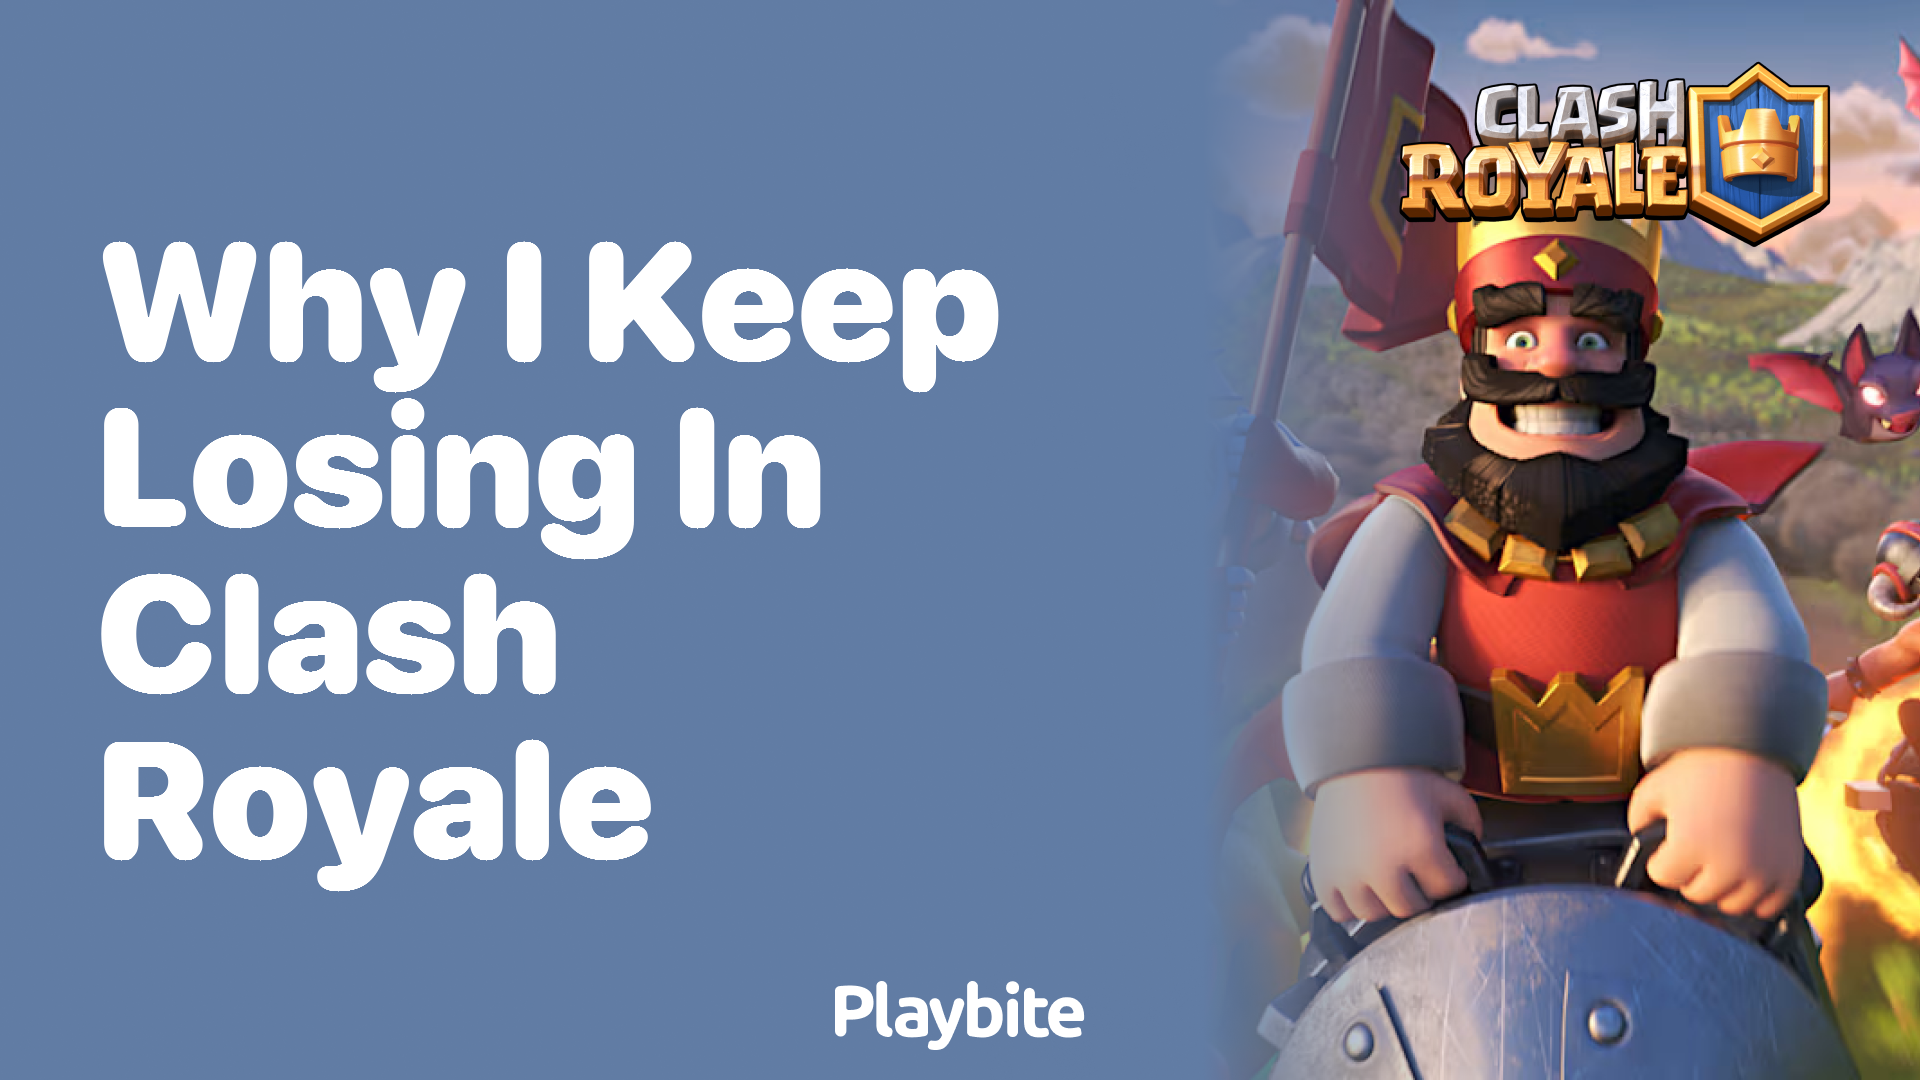 Why Do I Keep Losing in Clash Royale?